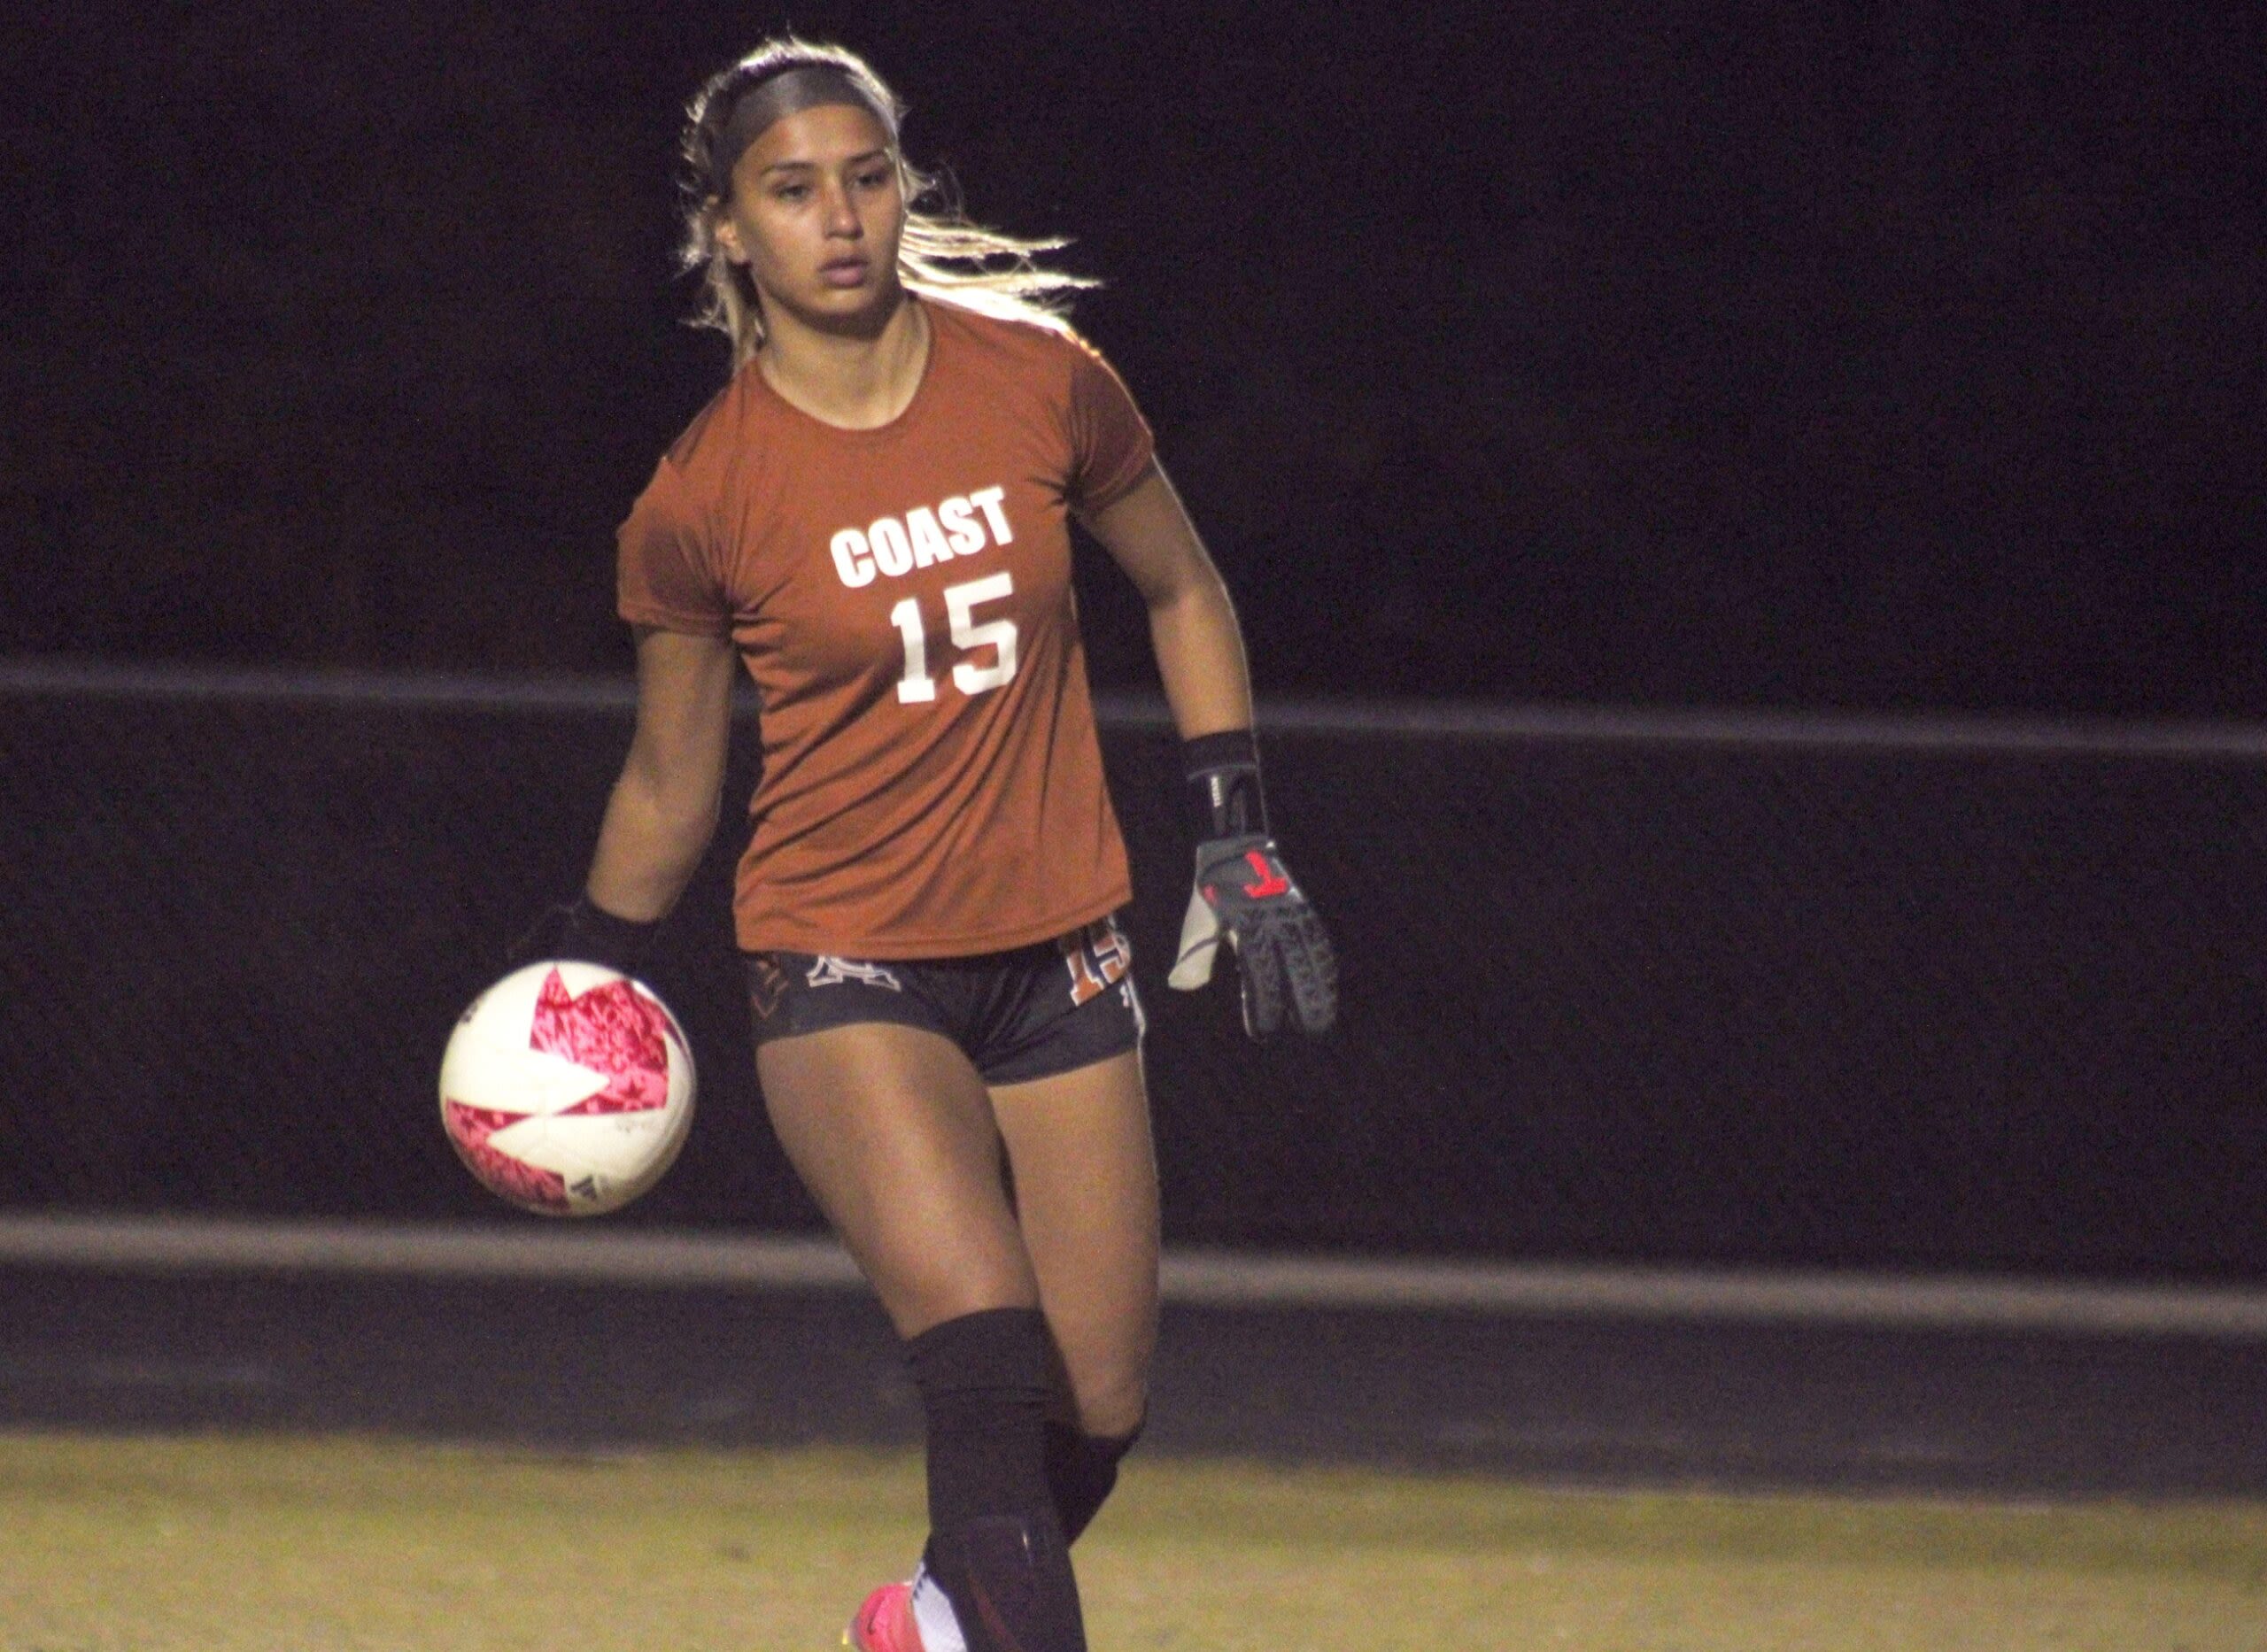 A five-sport athlete from Florida is ready to join the Kentucky women’s soccer team